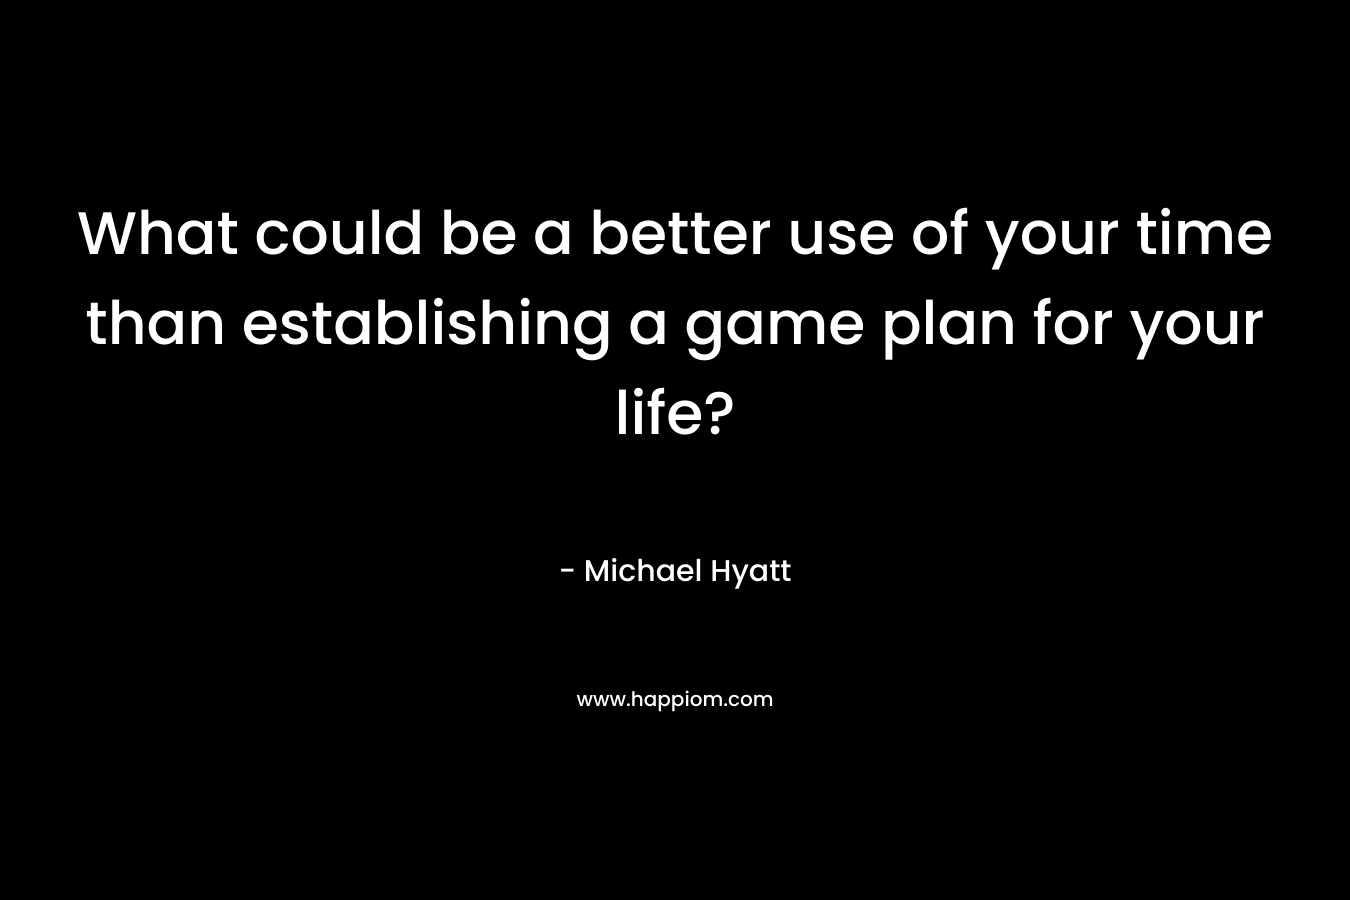 What could be a better use of your time than establishing a game plan for your life?